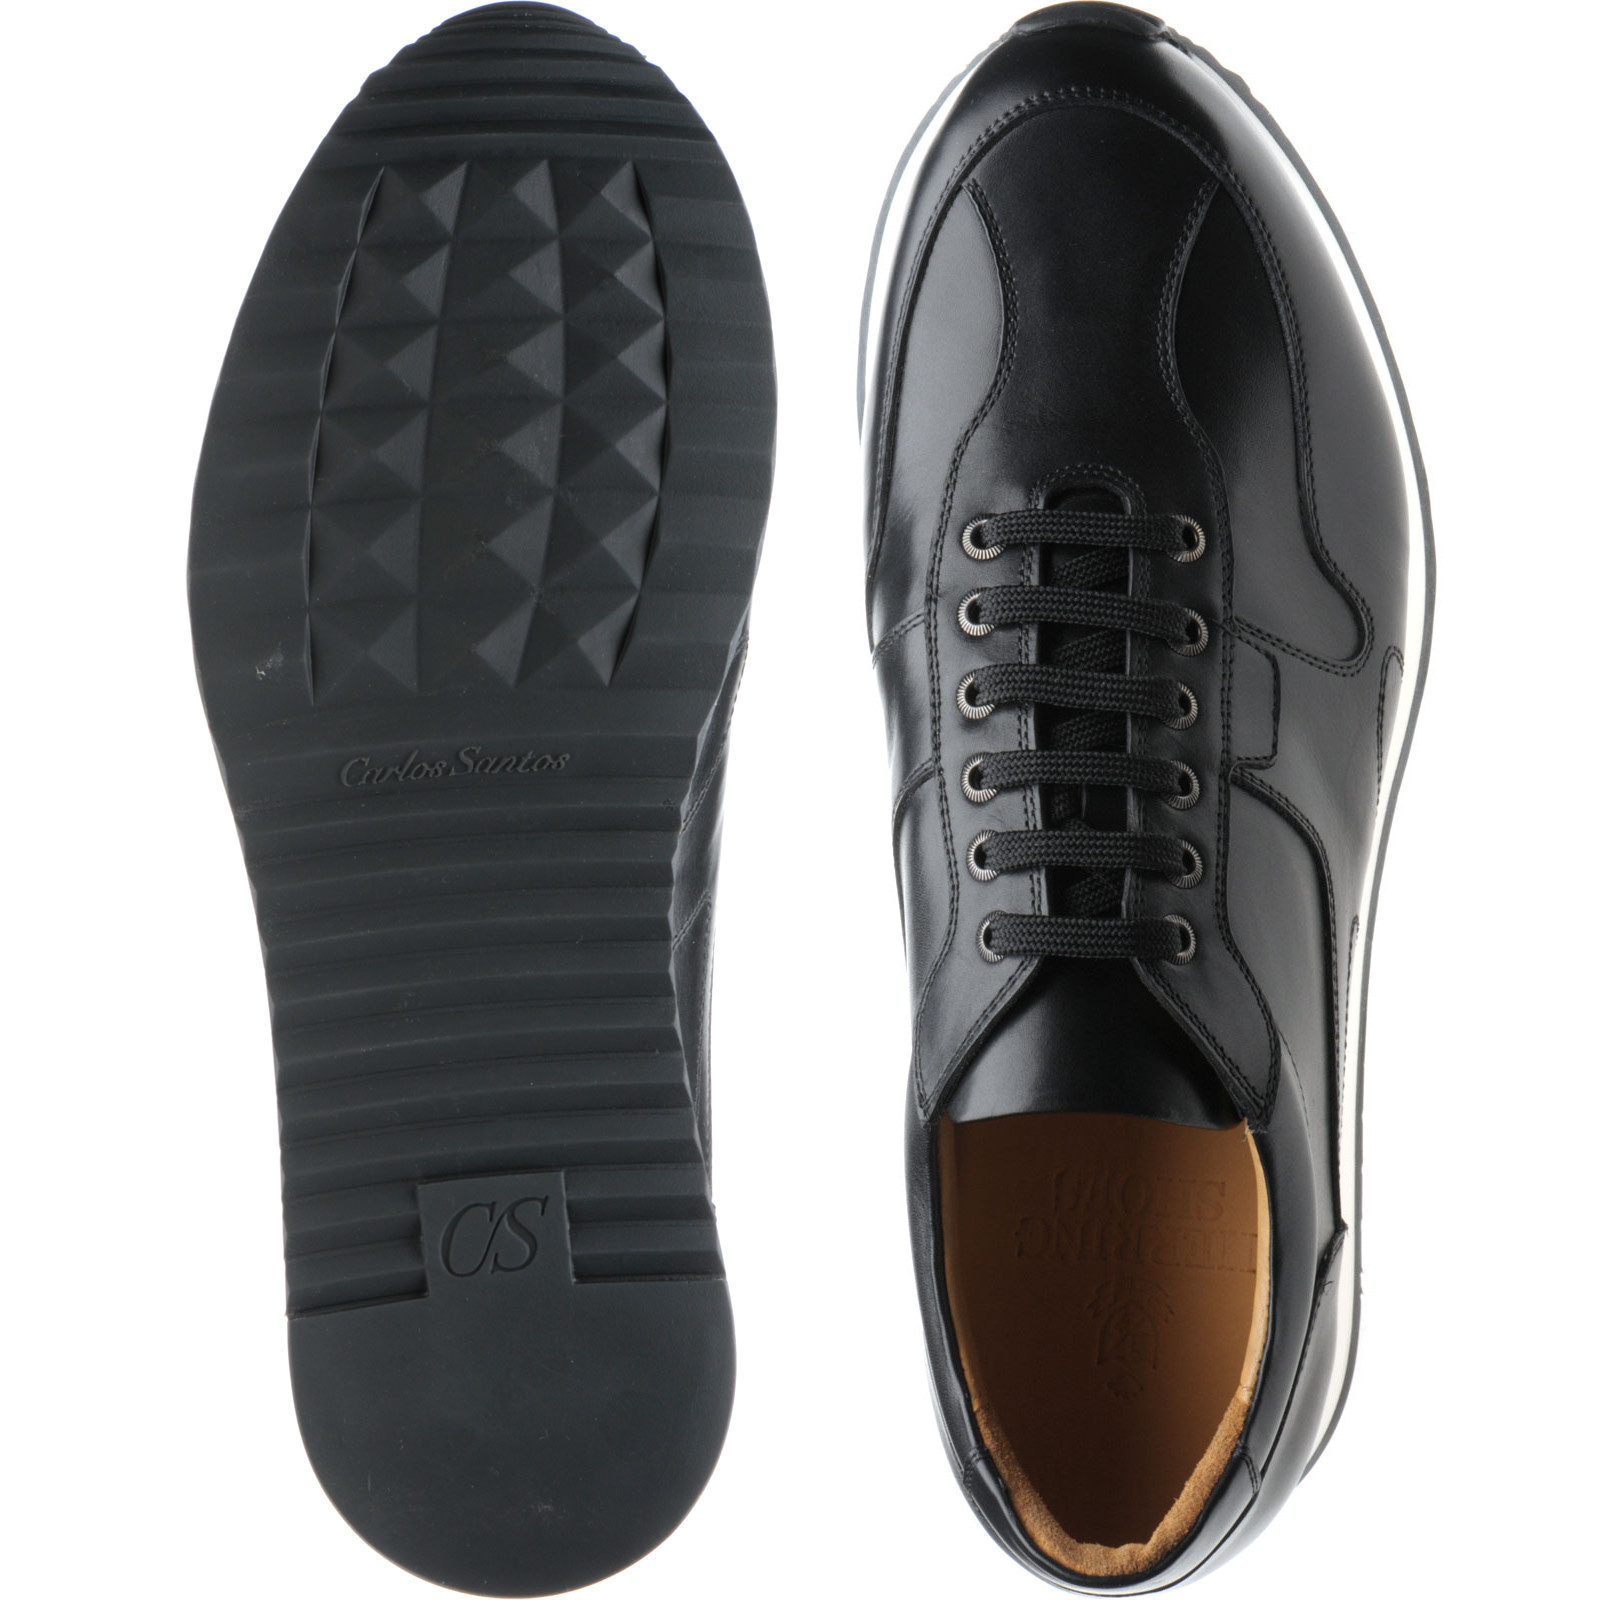 Herring shoes | Herring Trainers | Goodwood rubber-soled in Black Calf ...